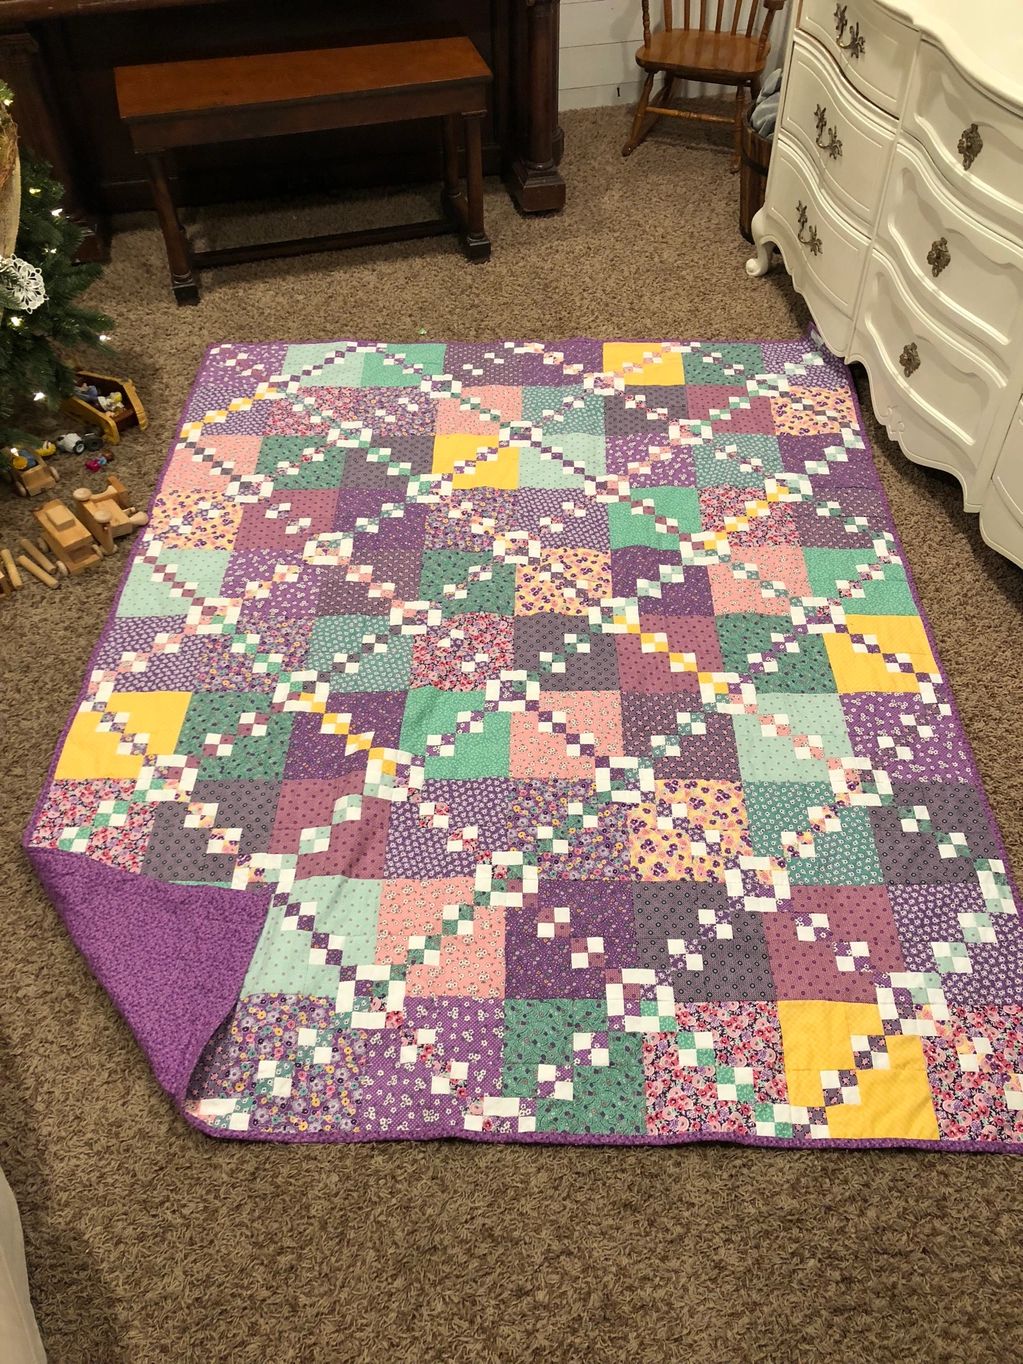 quilt that is pink and purple with yellow accents that is spiced together and hand quoted with free 